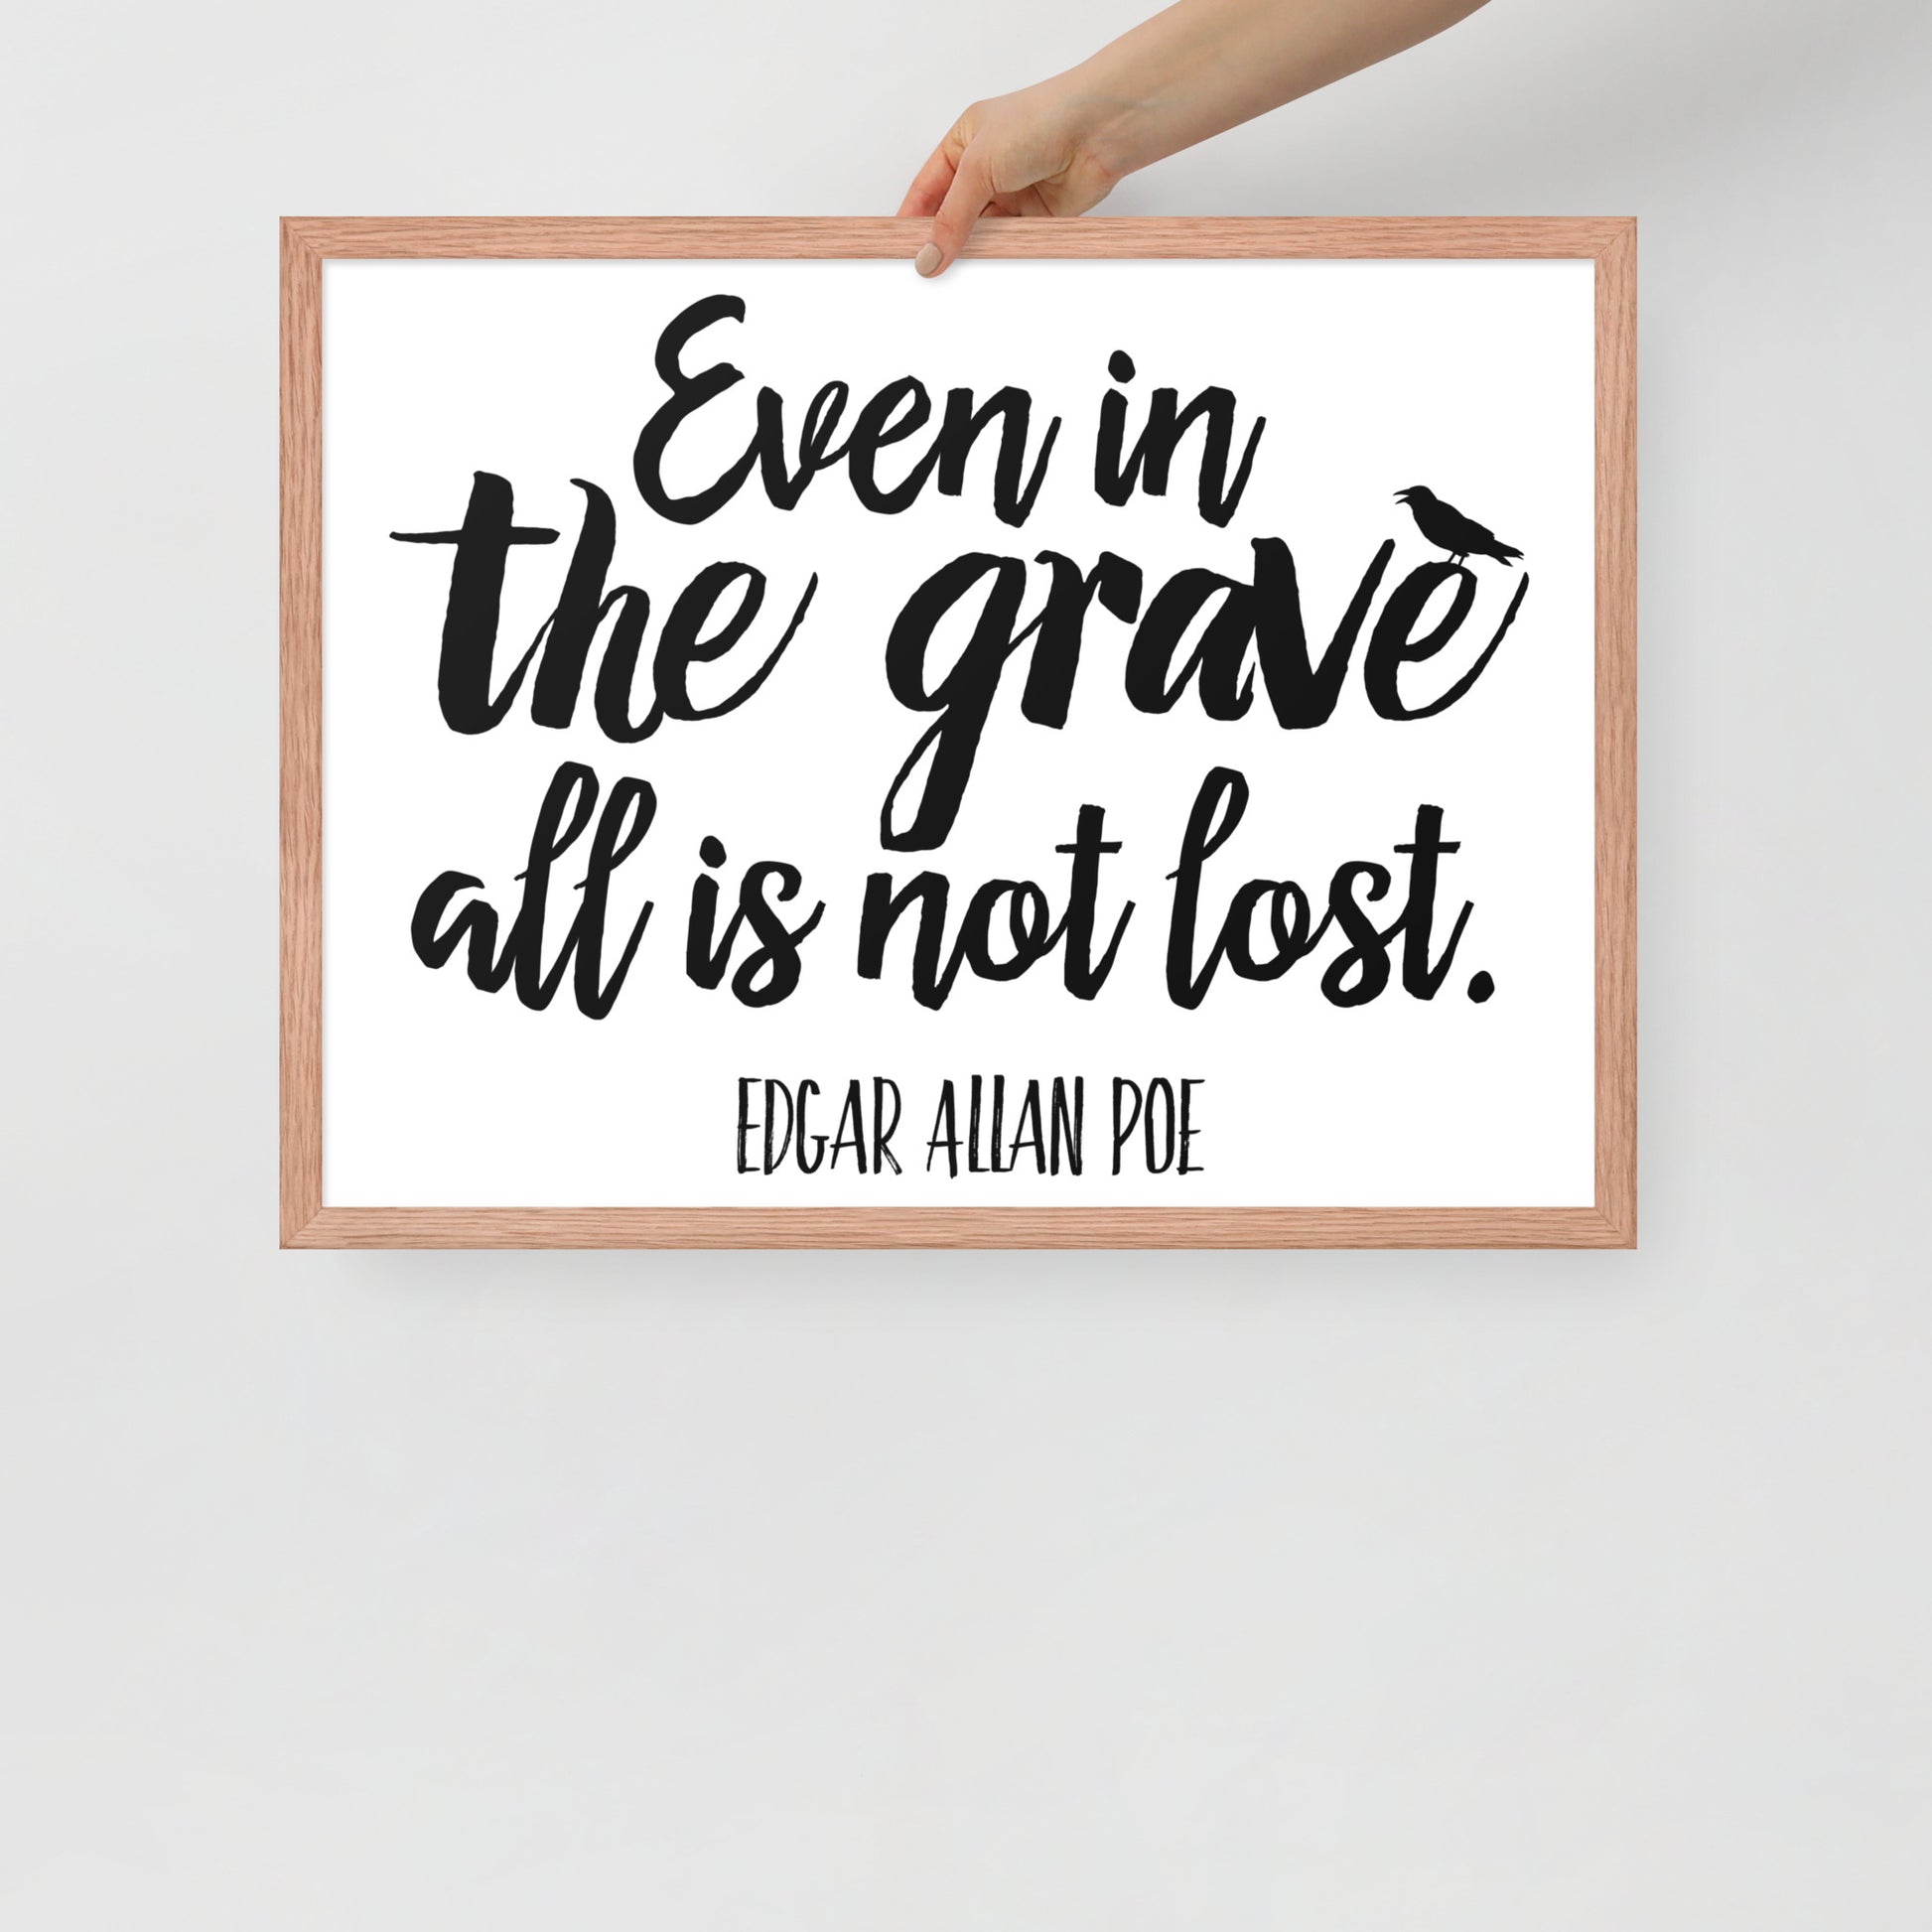 Even in the Grave - Edgar Allan Poe Quote Framed Poster - 18 x 24 Red Oak Frame